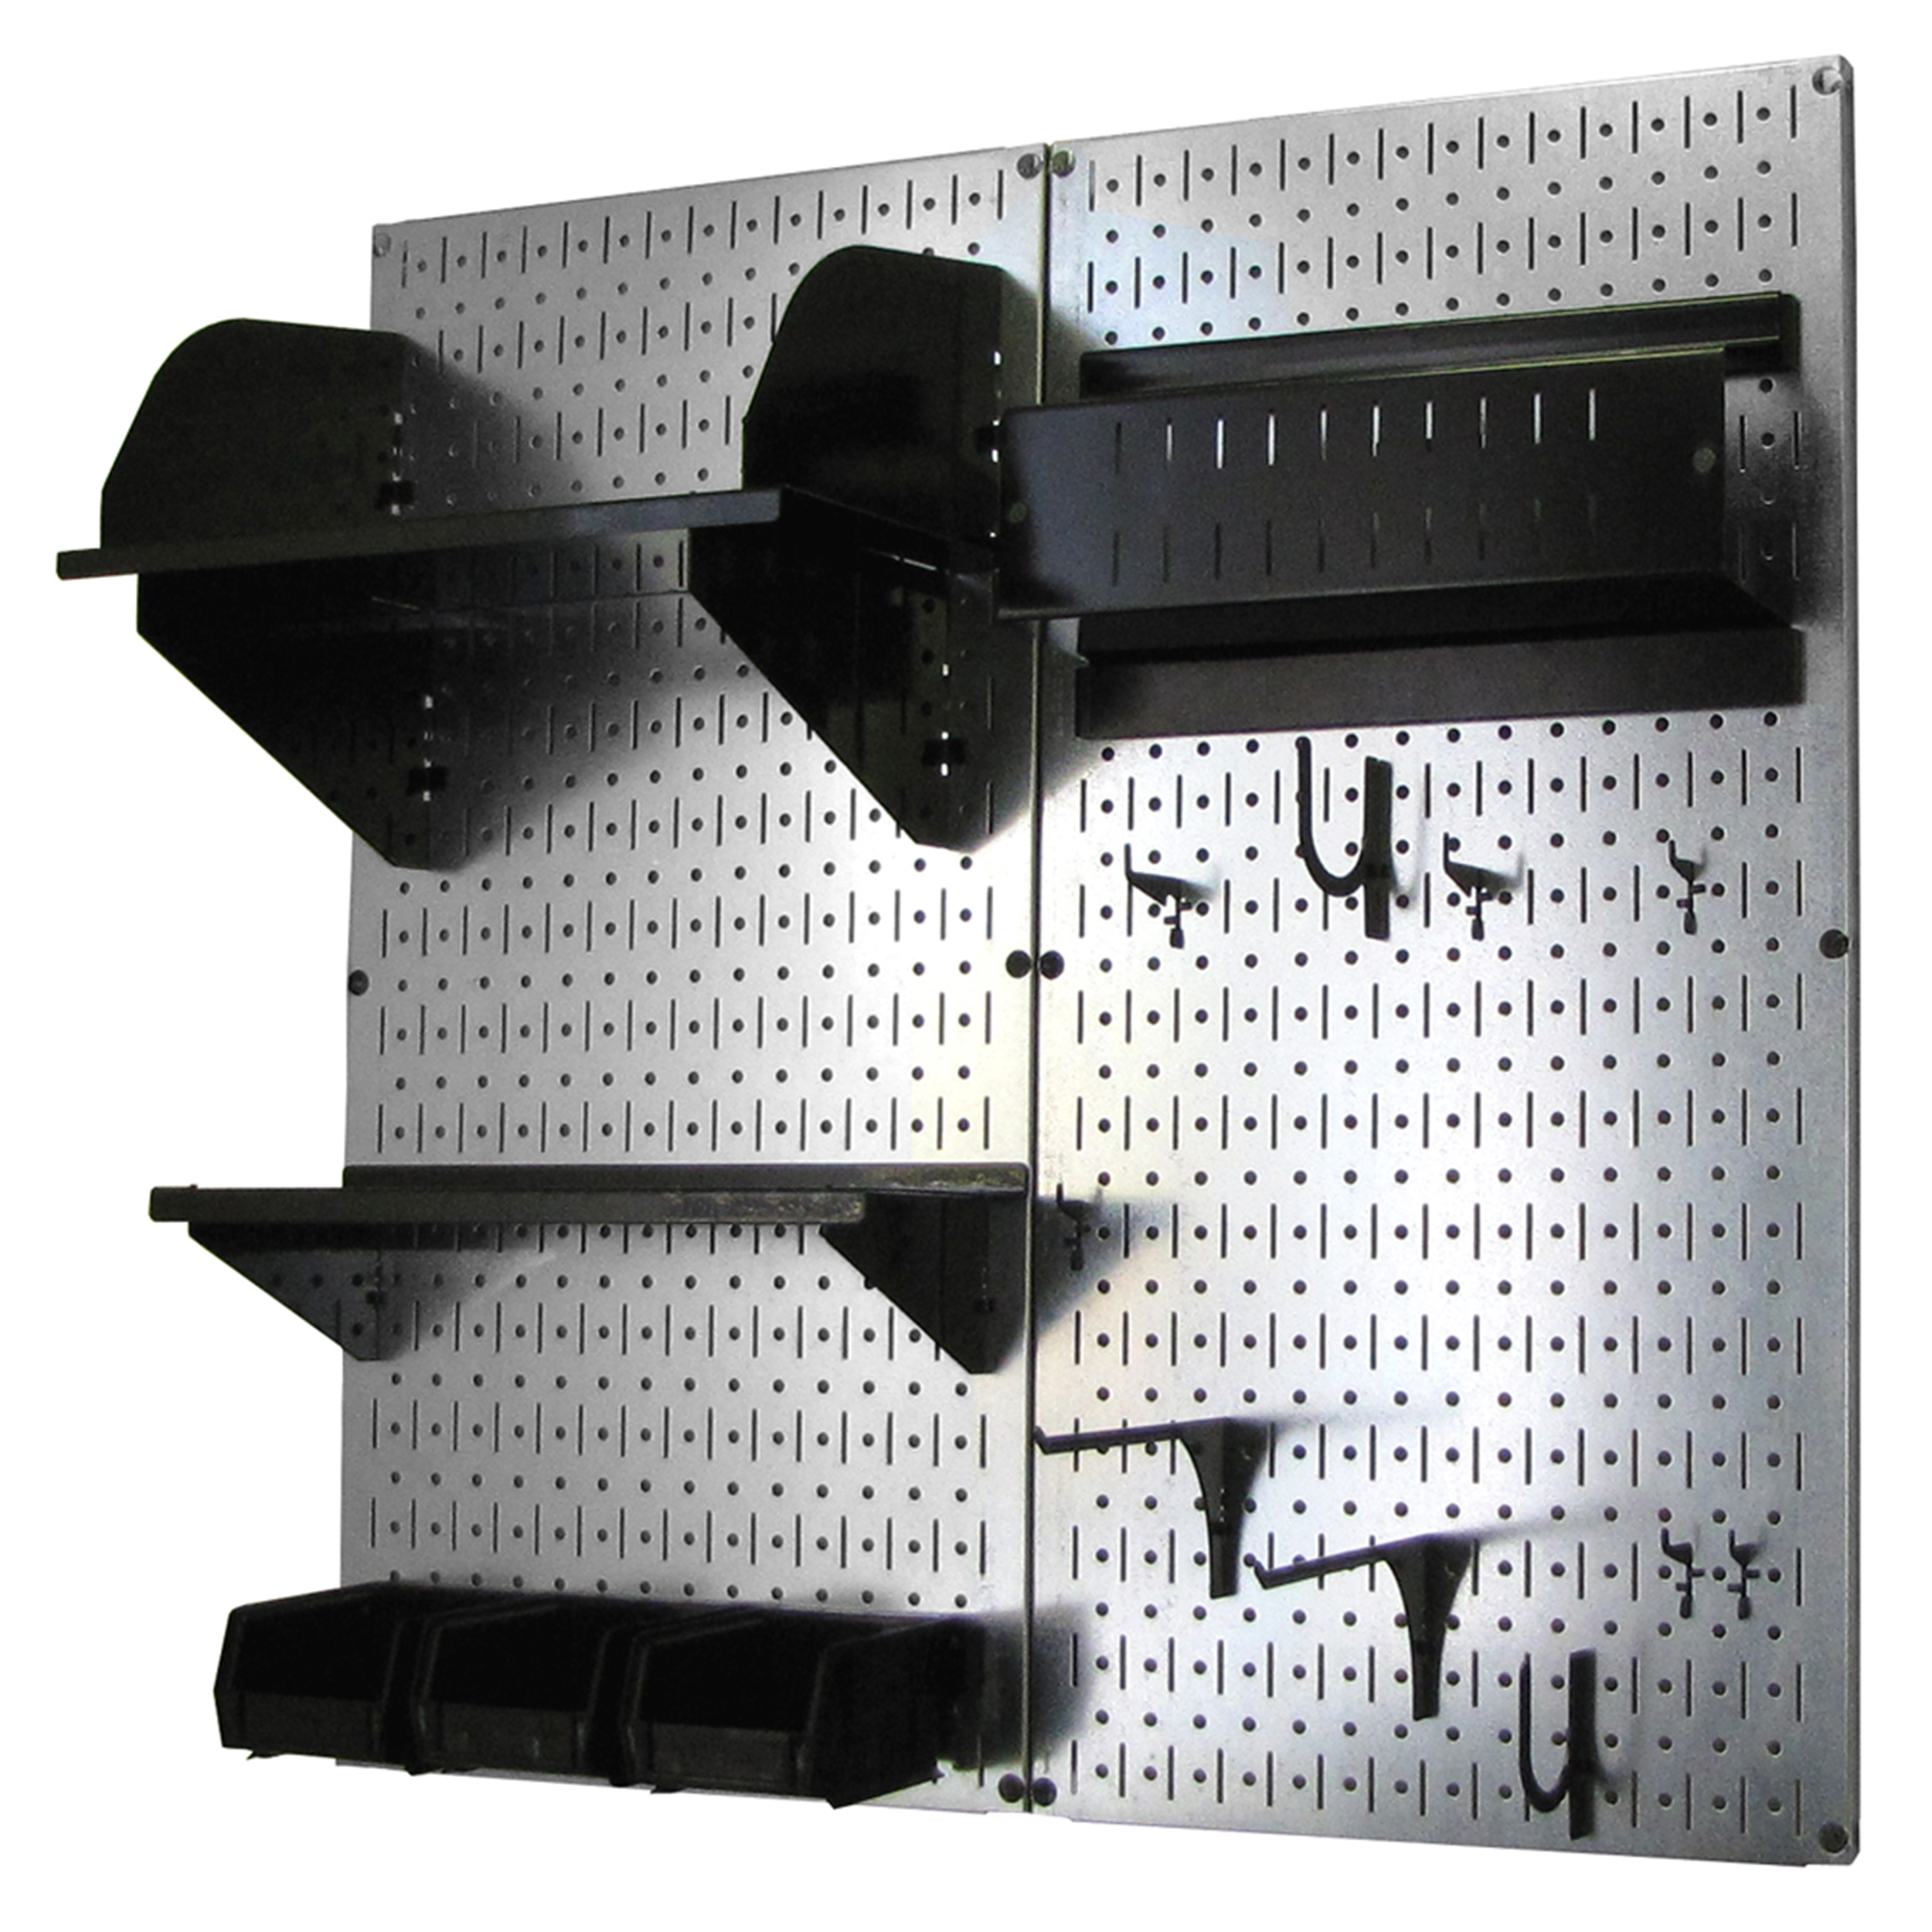 Pegboard Hobby Craft Pegboard Organizer Storage Kit With Metallic Pegboard And Black Accessories